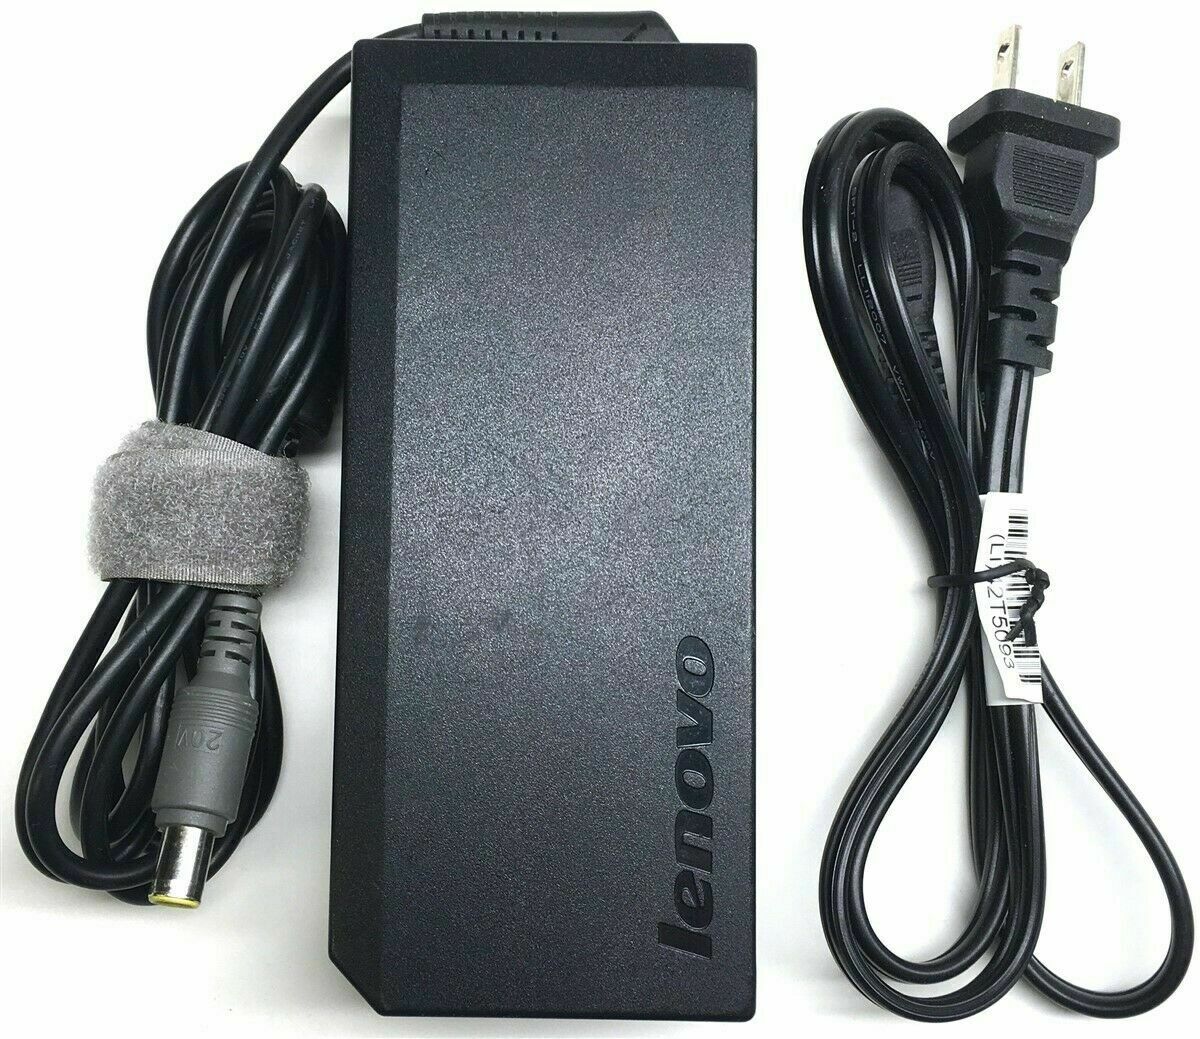 Genuine Lenovo Thinkpad 135W W510 W520 Laptop AC Adapter Power Supply Charger Compatible Brand: For Lenovo Compatib